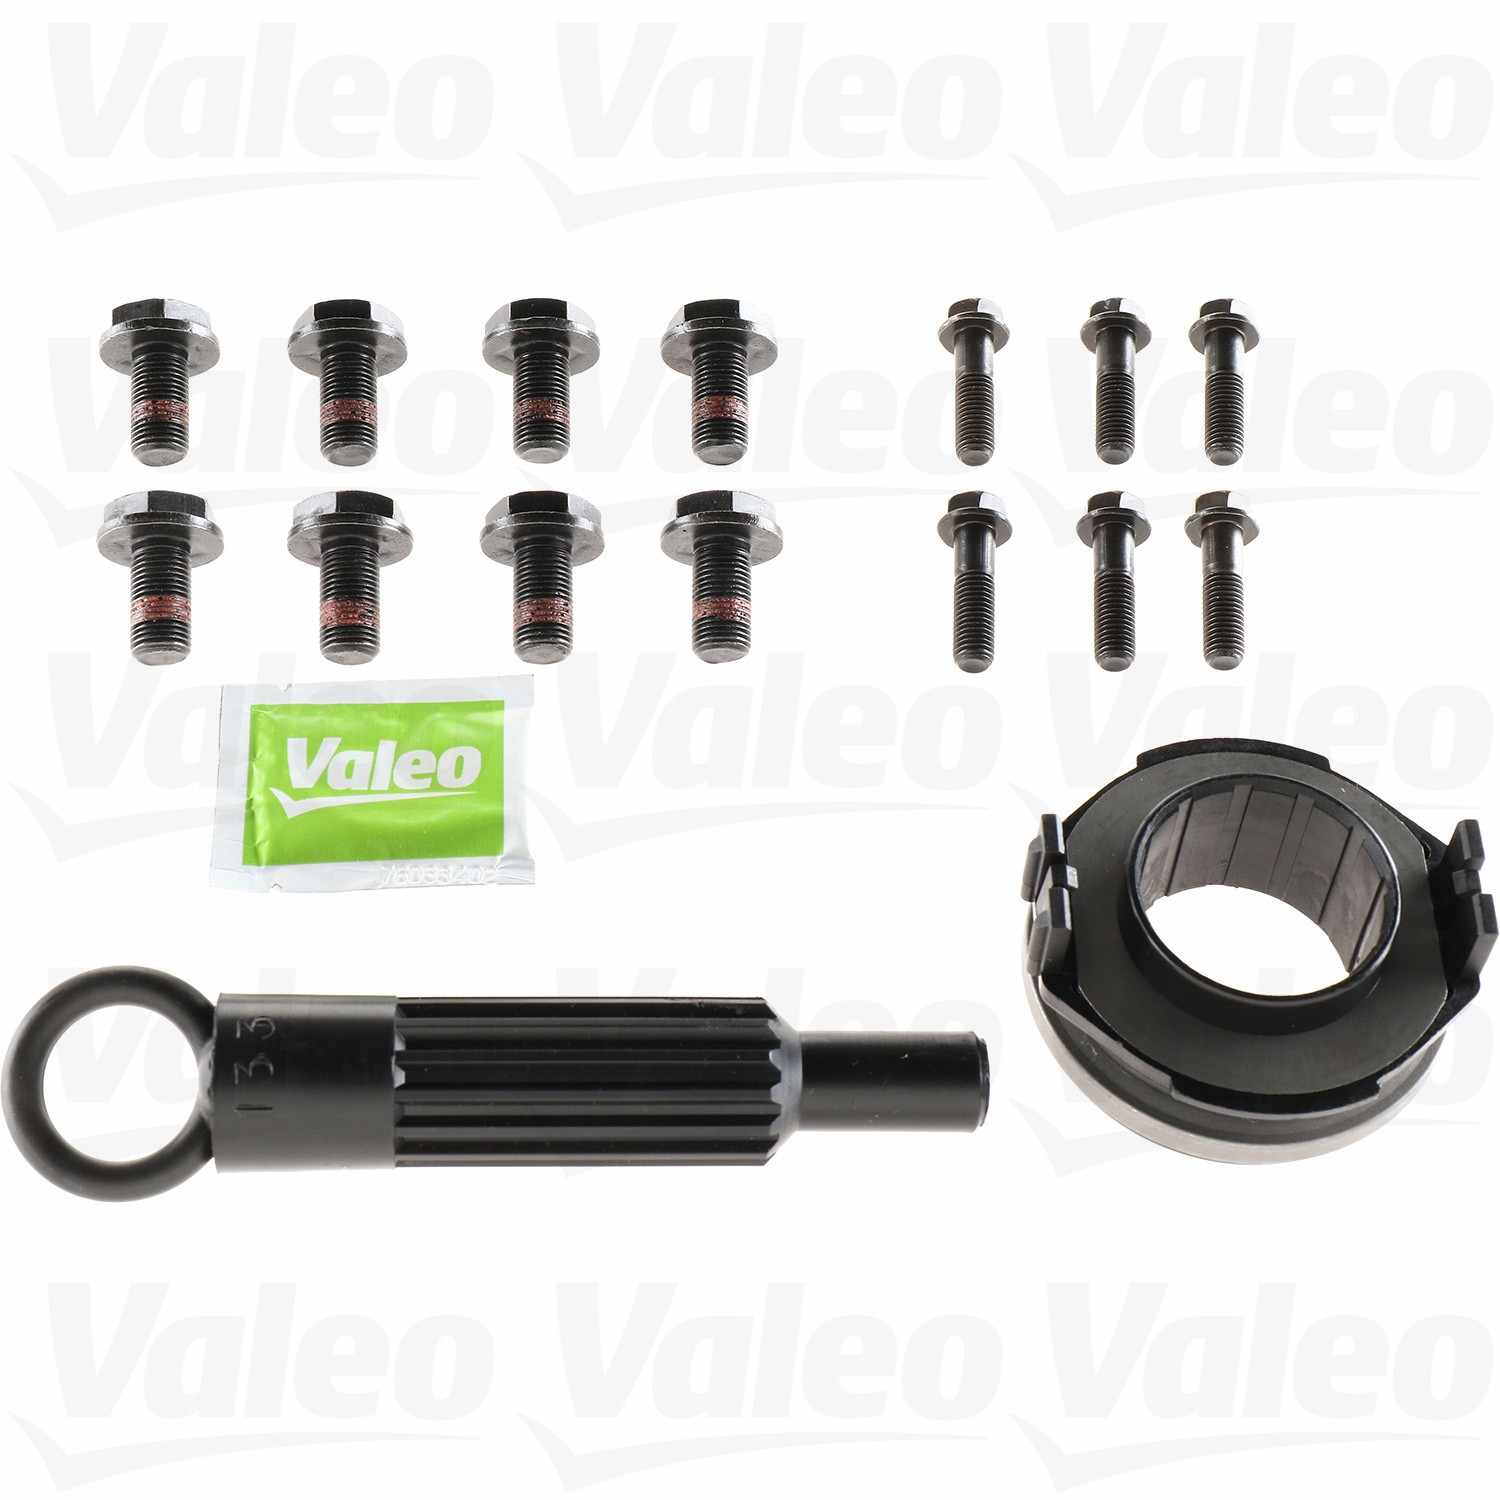 Other View of Clutch Flywheel Conversion Kit VALEO 52151203